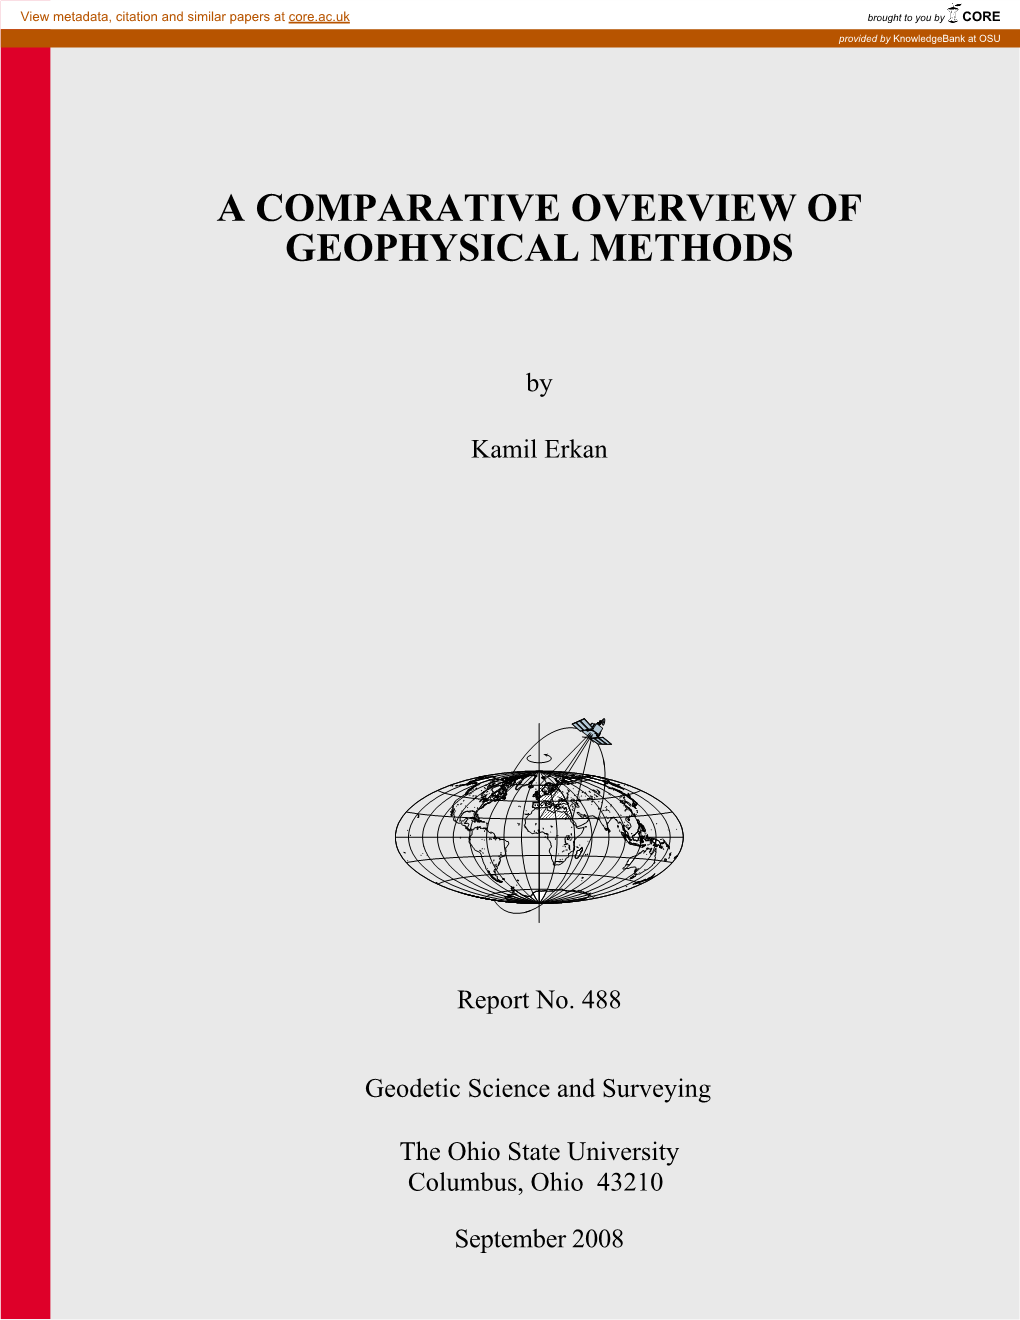 A Comparative Overview of Geophysical Methods